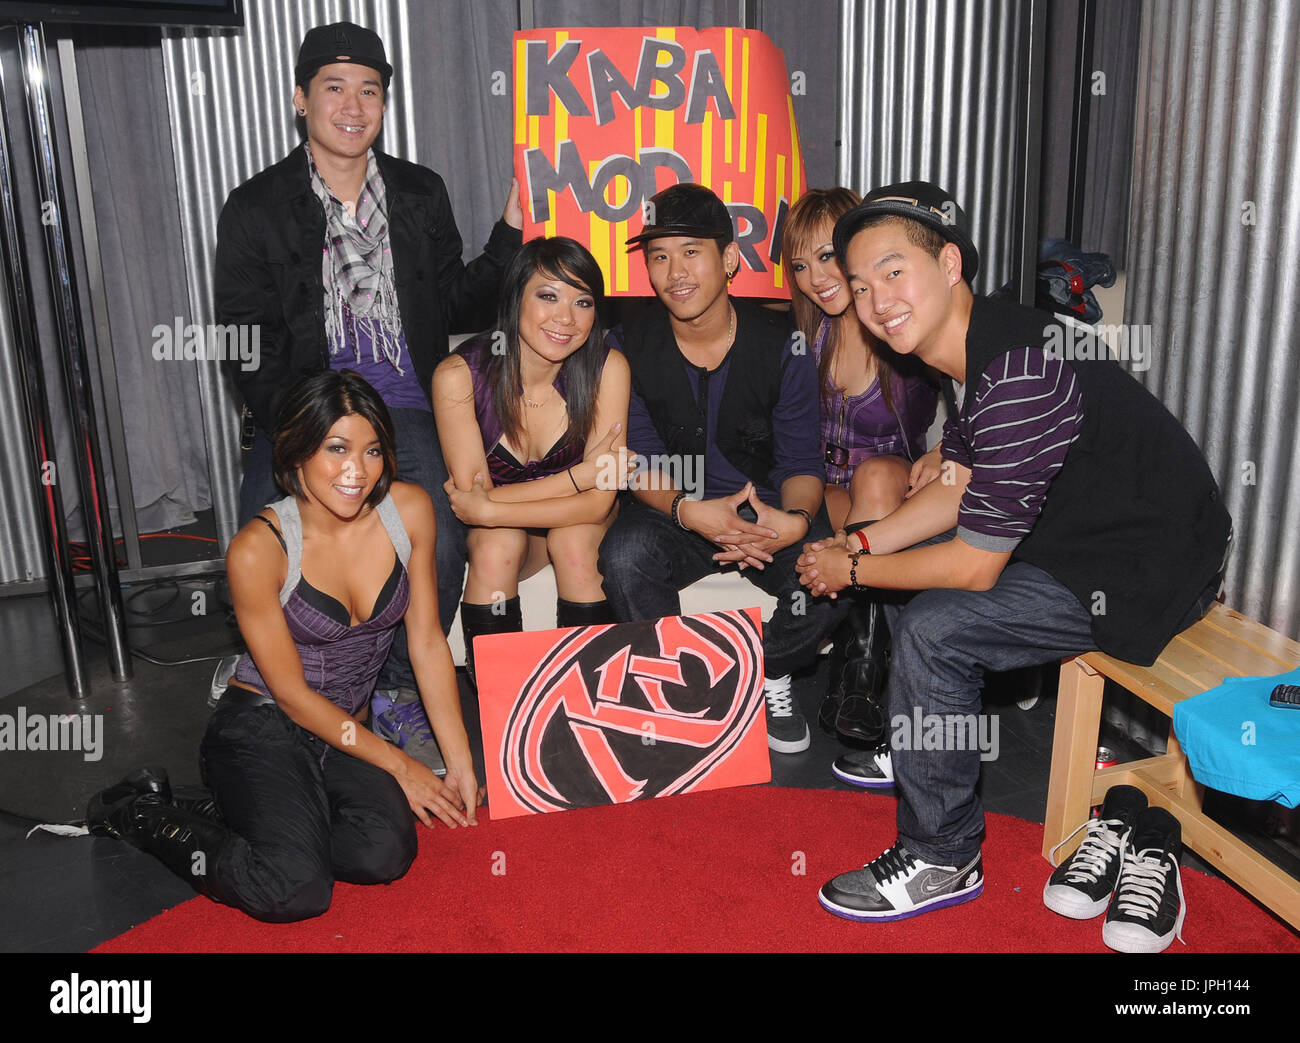 Kaba Modern at the Live Taping of 'America's Best Dance Crew: Battle for the VMAs' - Backstage of Stage 23 at the Warner Bros. Studio in Burbank, CA. The event took place on Thursday, August 28, 2008. Photo by: Sthanlee B. Mirador Pacific Rim Photo Press. Stock Photo